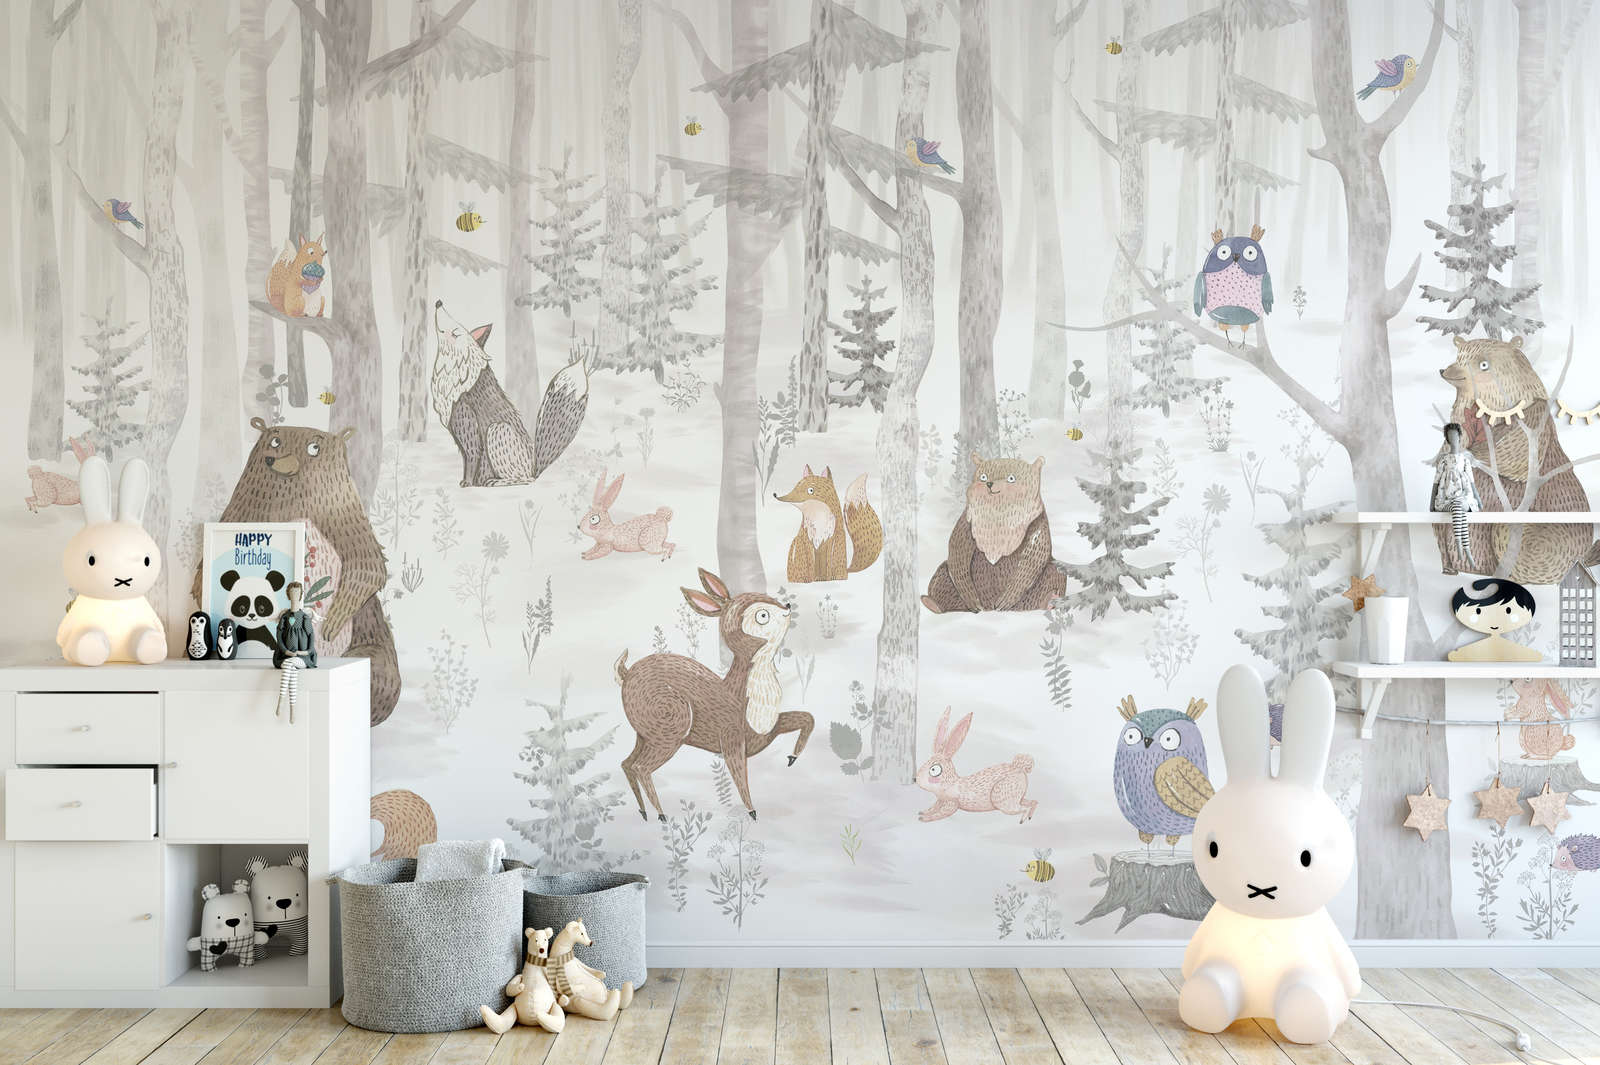             Photo wallpaper Enchanted Forest with Animals - Textured non-woven
        